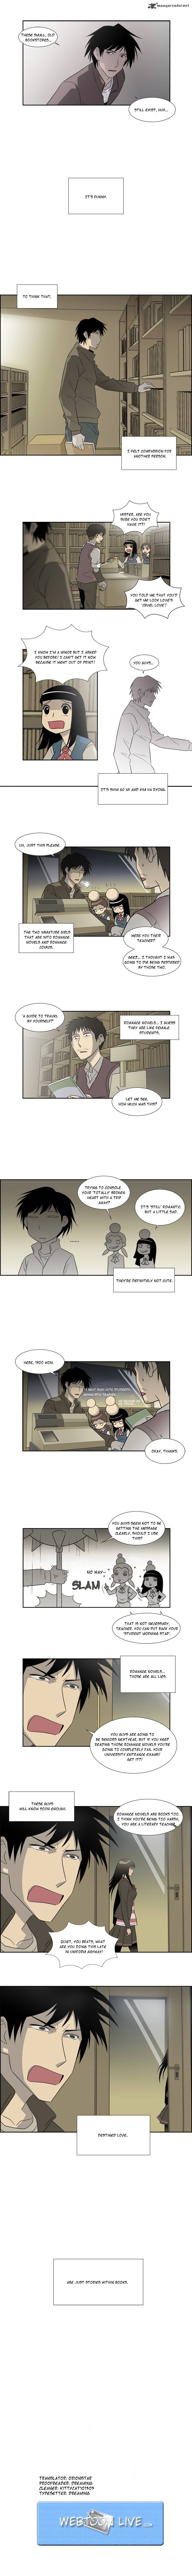 Melo Holic Chapter 13 Page 4